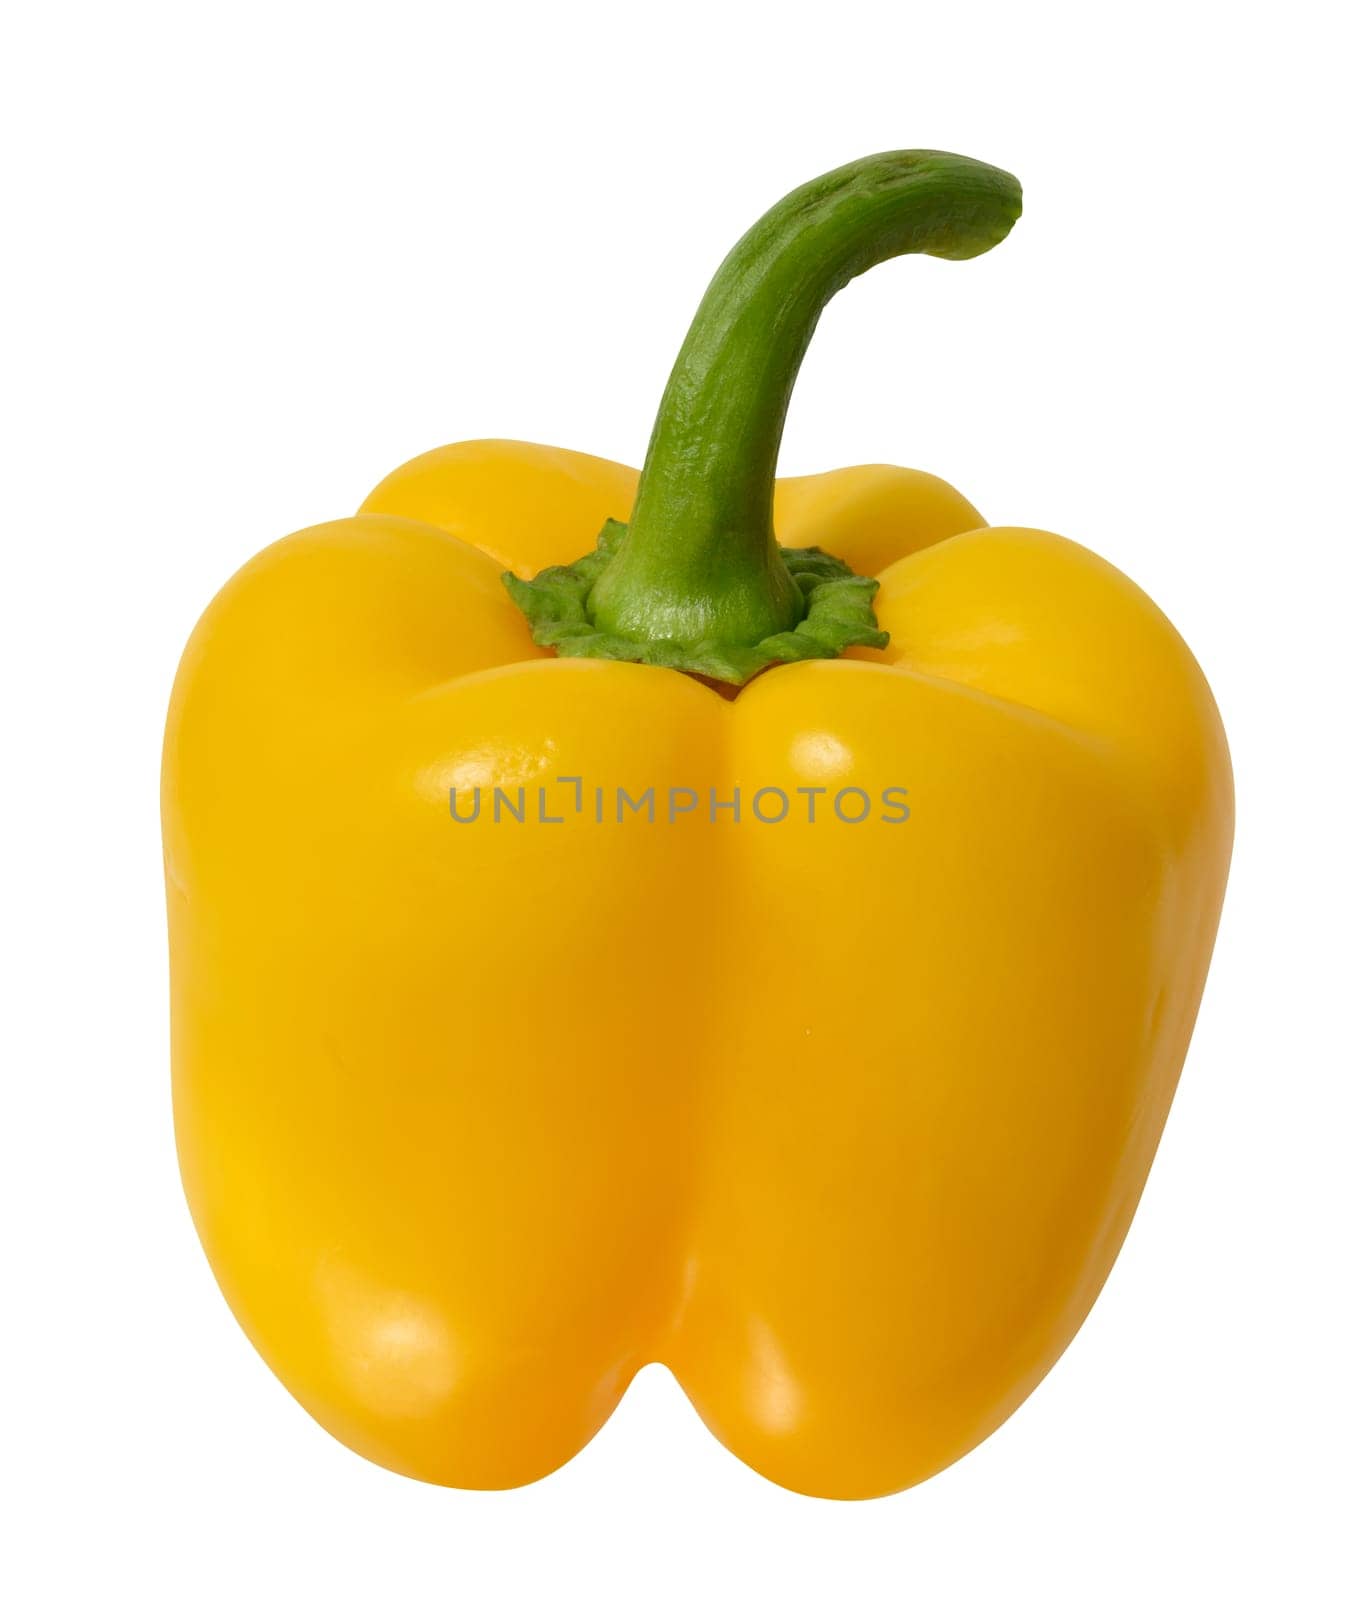 Whole yellow bell pepper isolated on white background, juicy and healthy vegetable